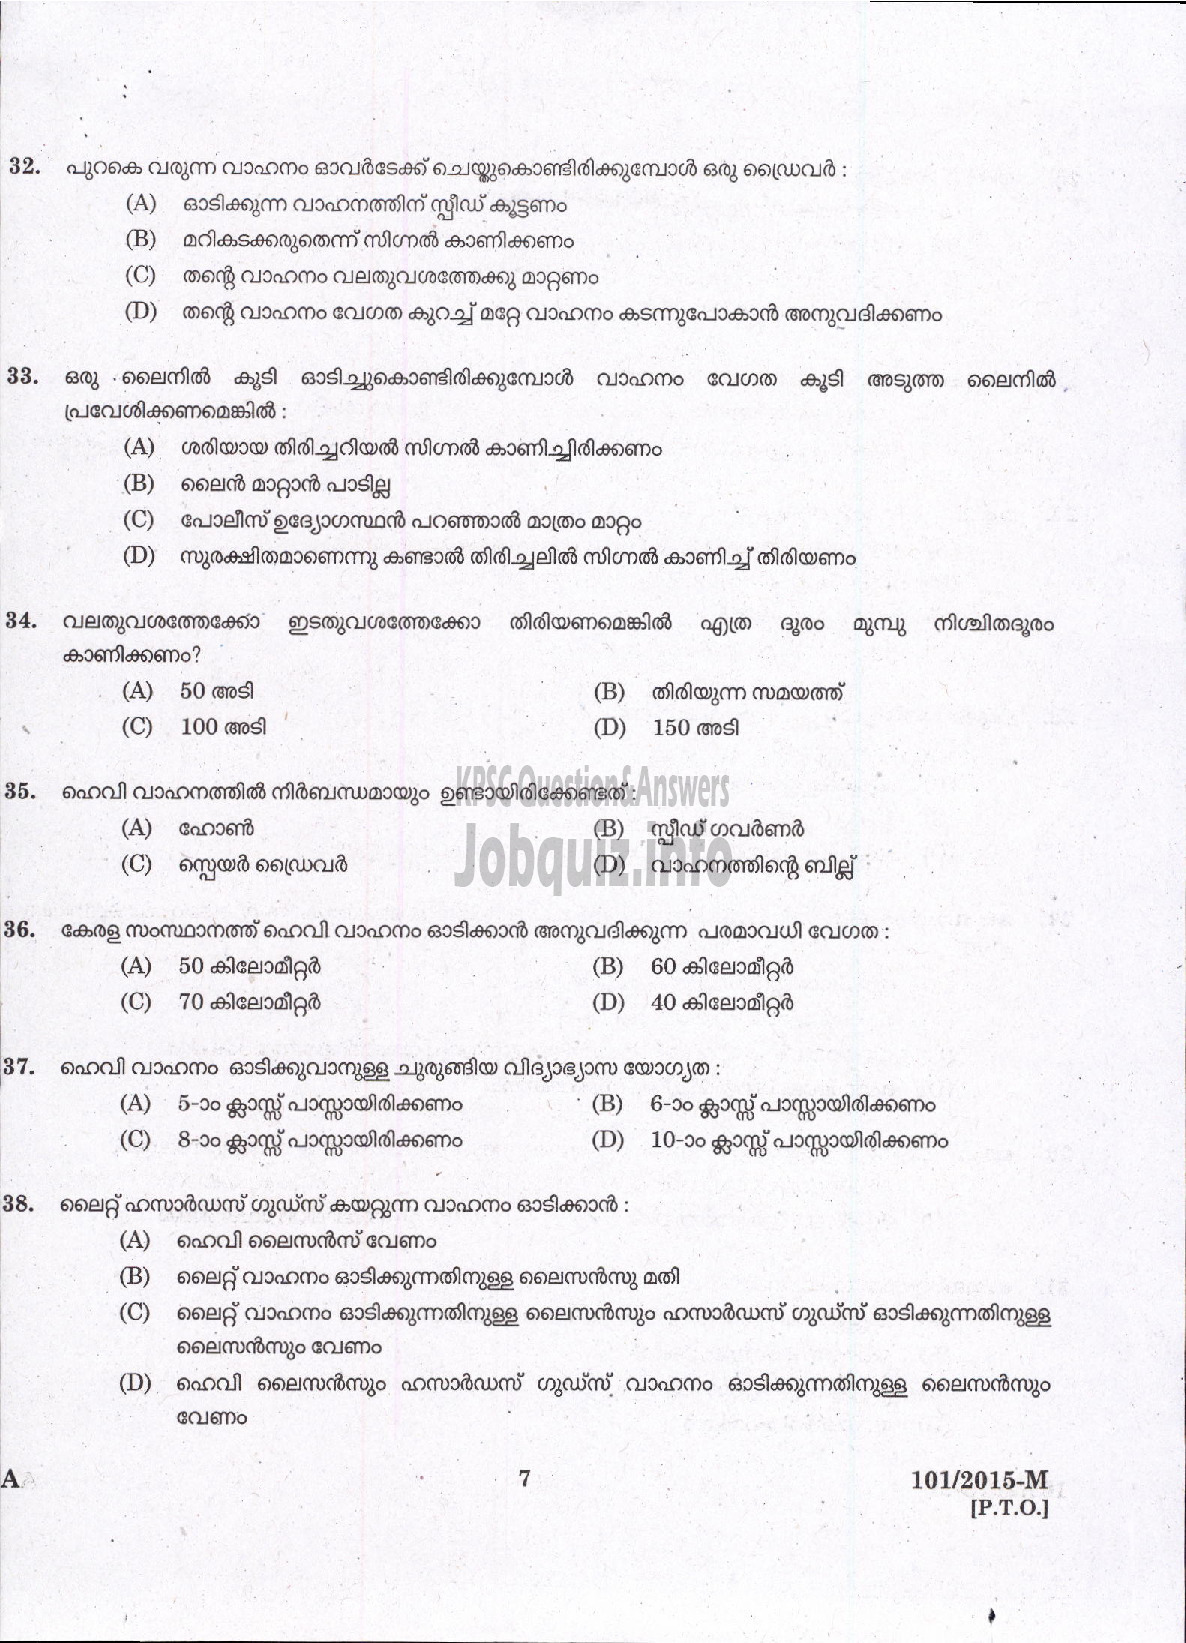 Kerala PSC Question Paper - FIREMAN DRIVER CUM PUMP OPERATOR TRAINEE FIRE AND RESCUE SERVICES ( Malayalam ) -5